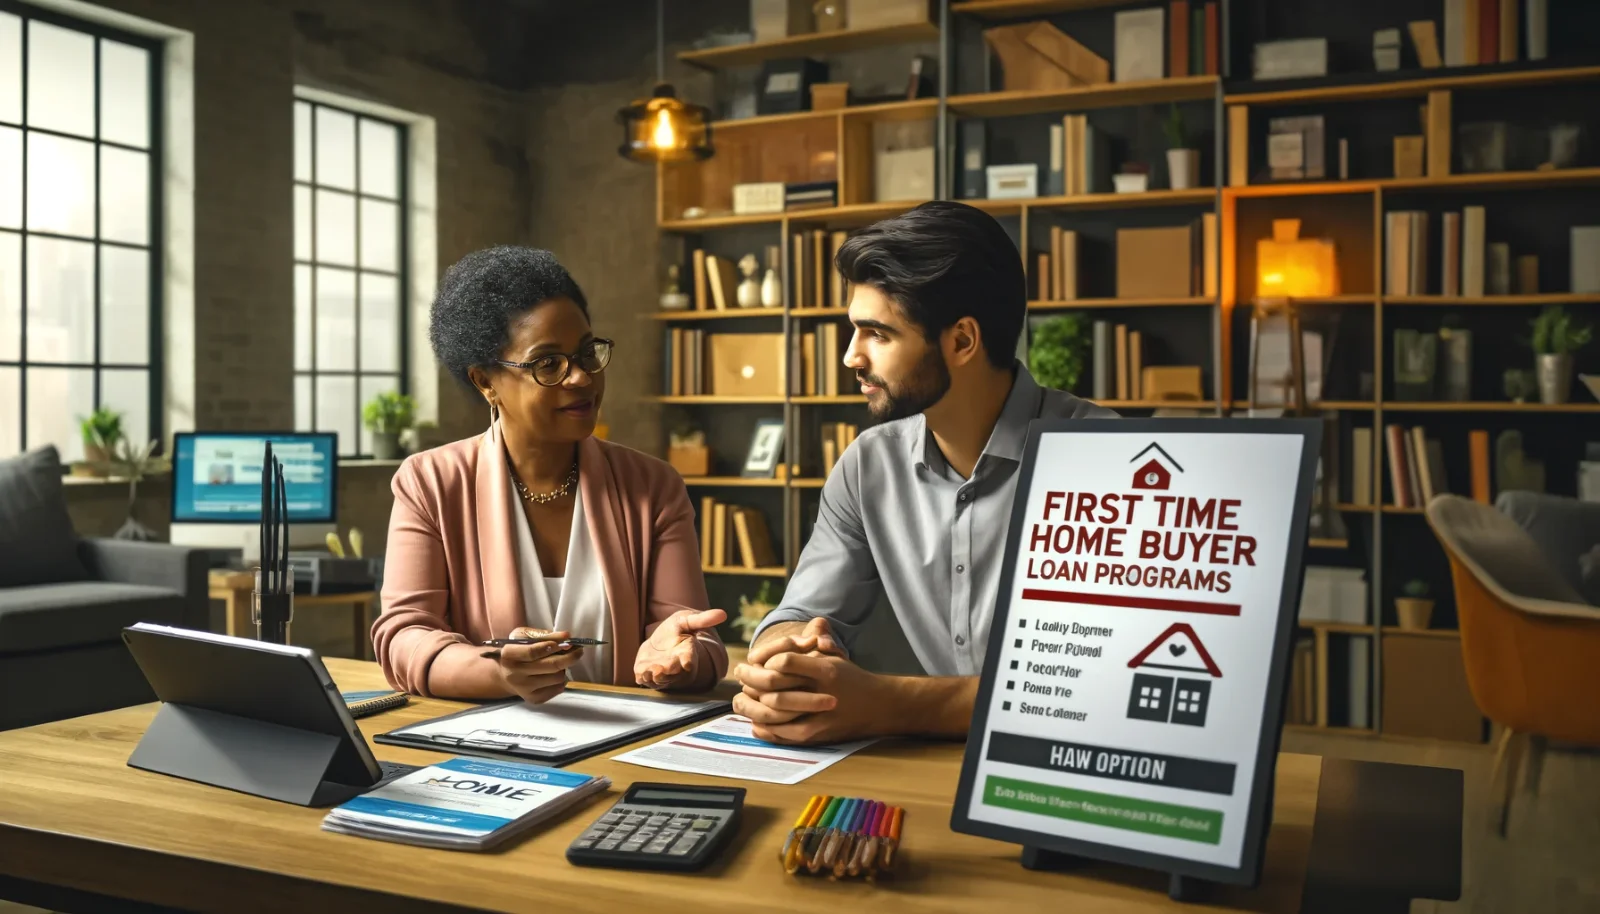 Image of First Time Home Buyers